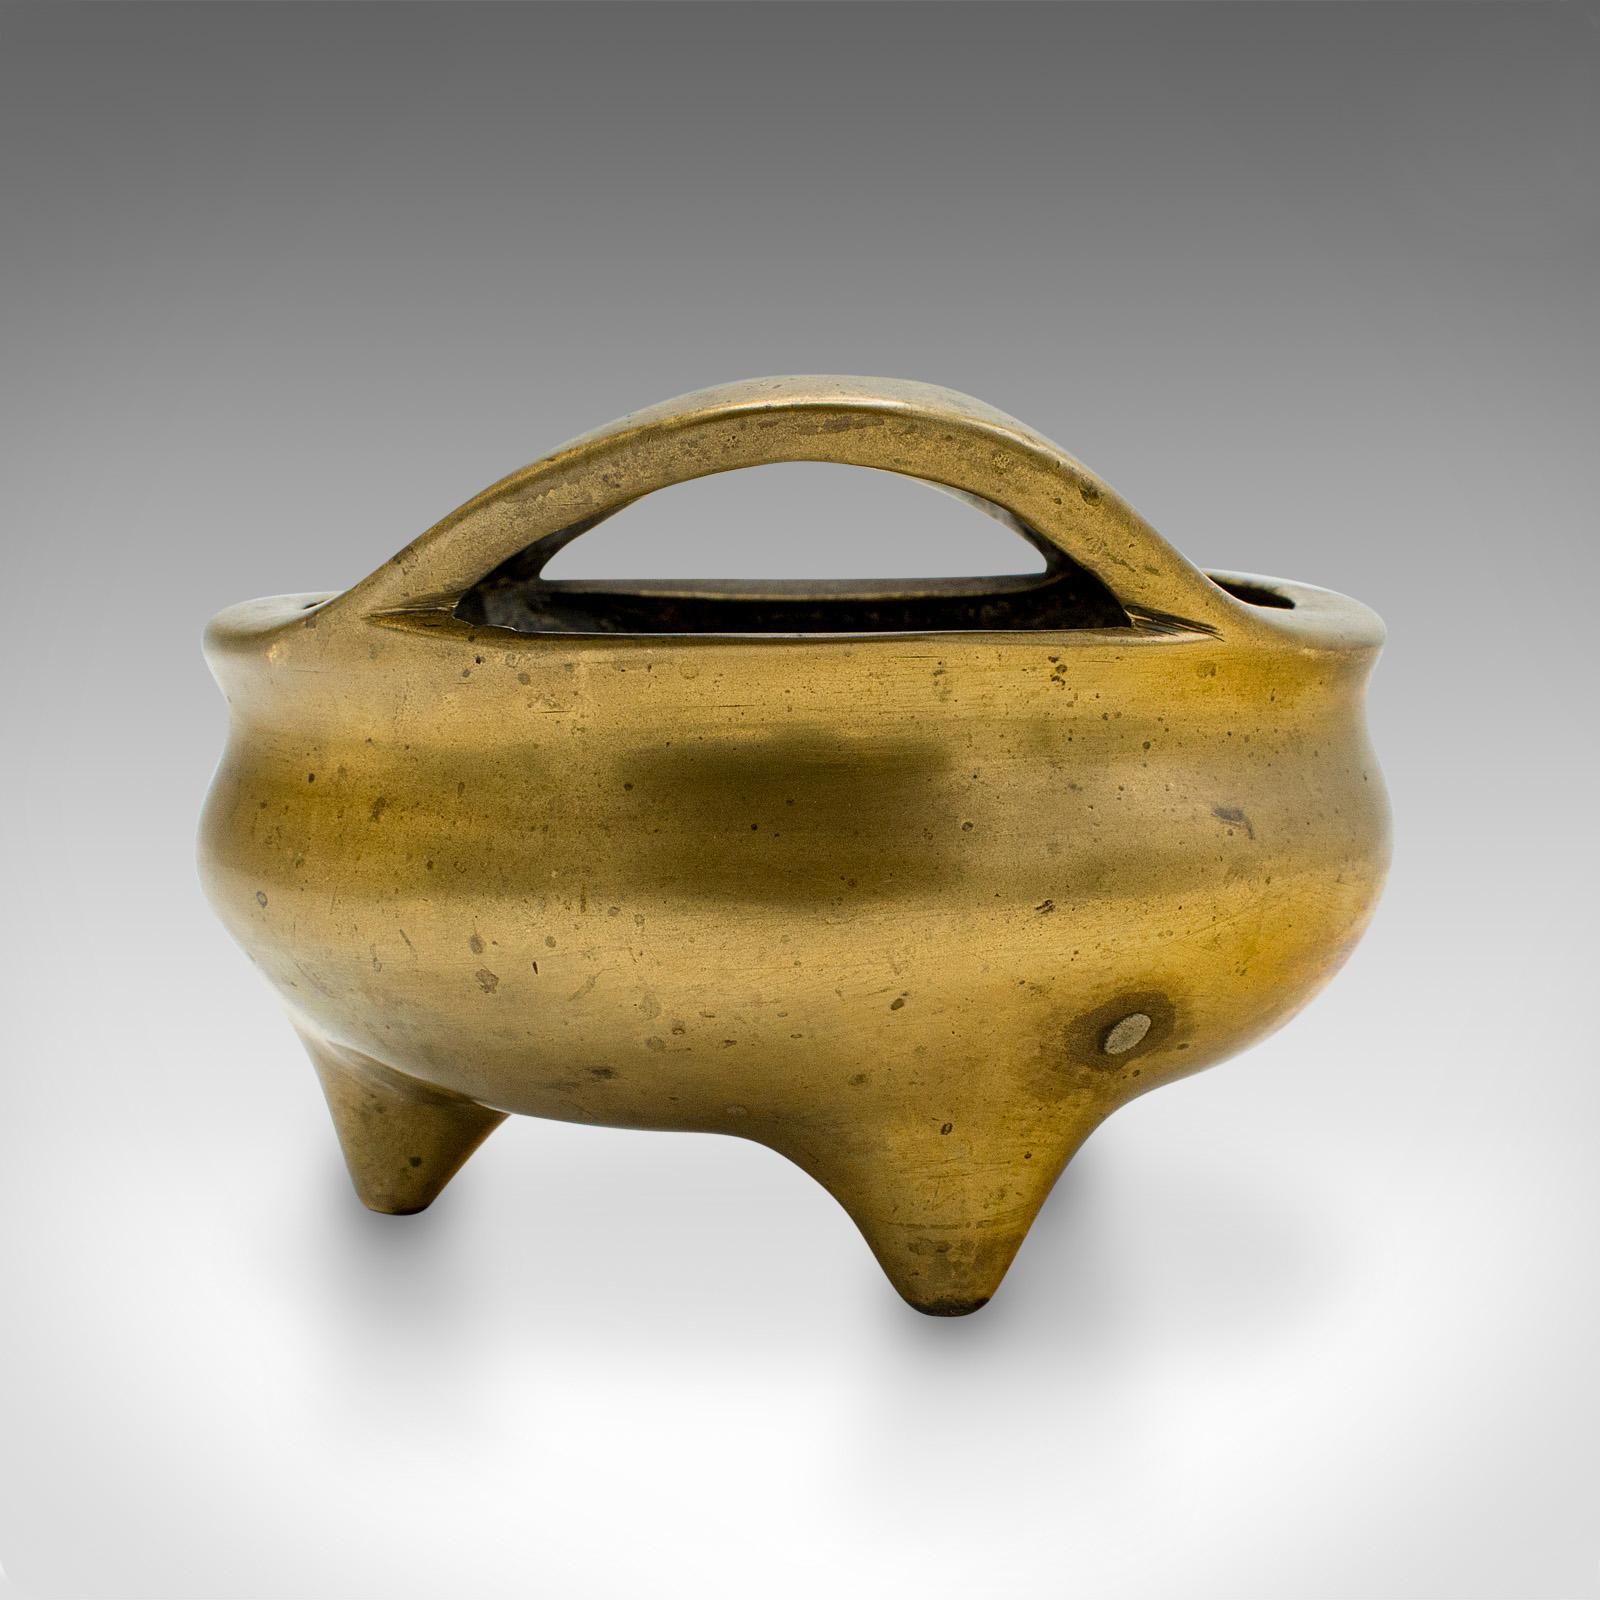 Chinese Export Antique Censer, Chinese, Bronze, Incense Burner, Libation Cup, Victorian, C.1850 For Sale